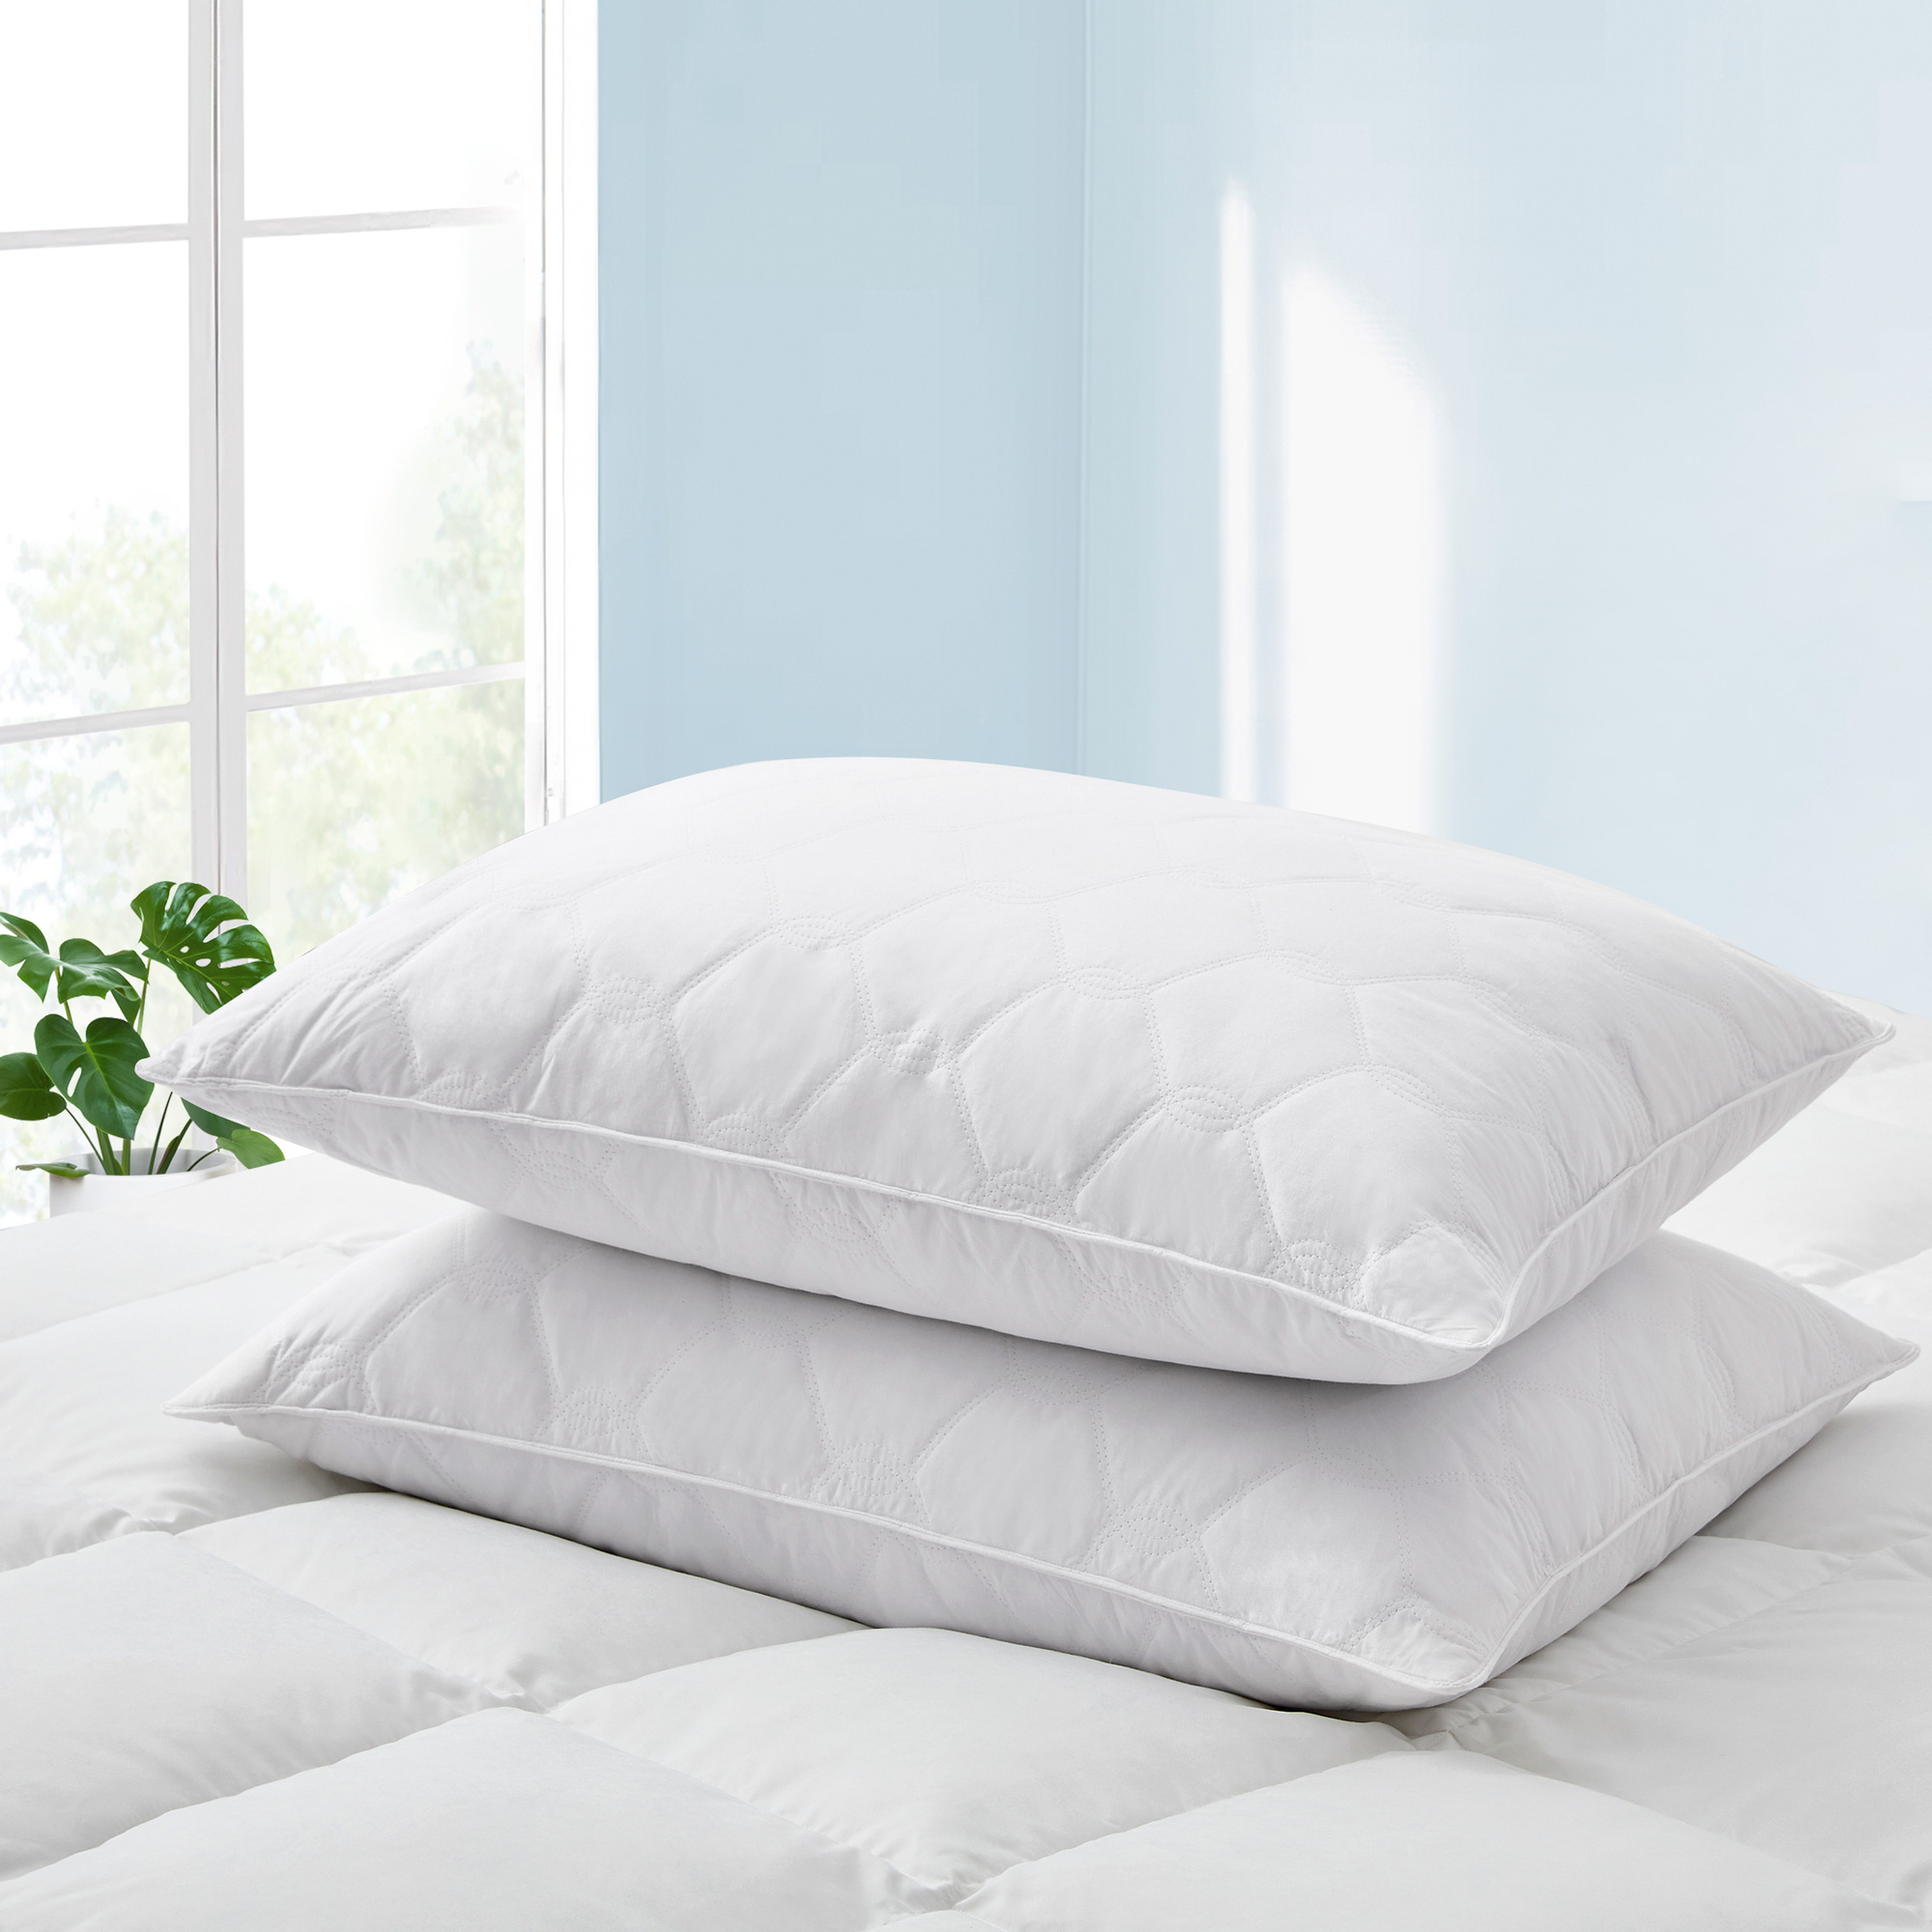 Puredown Quilted Feather And Down Pillow With Cotton Cover - Set Of 2 - STANDARD/QUEEN, WHITE